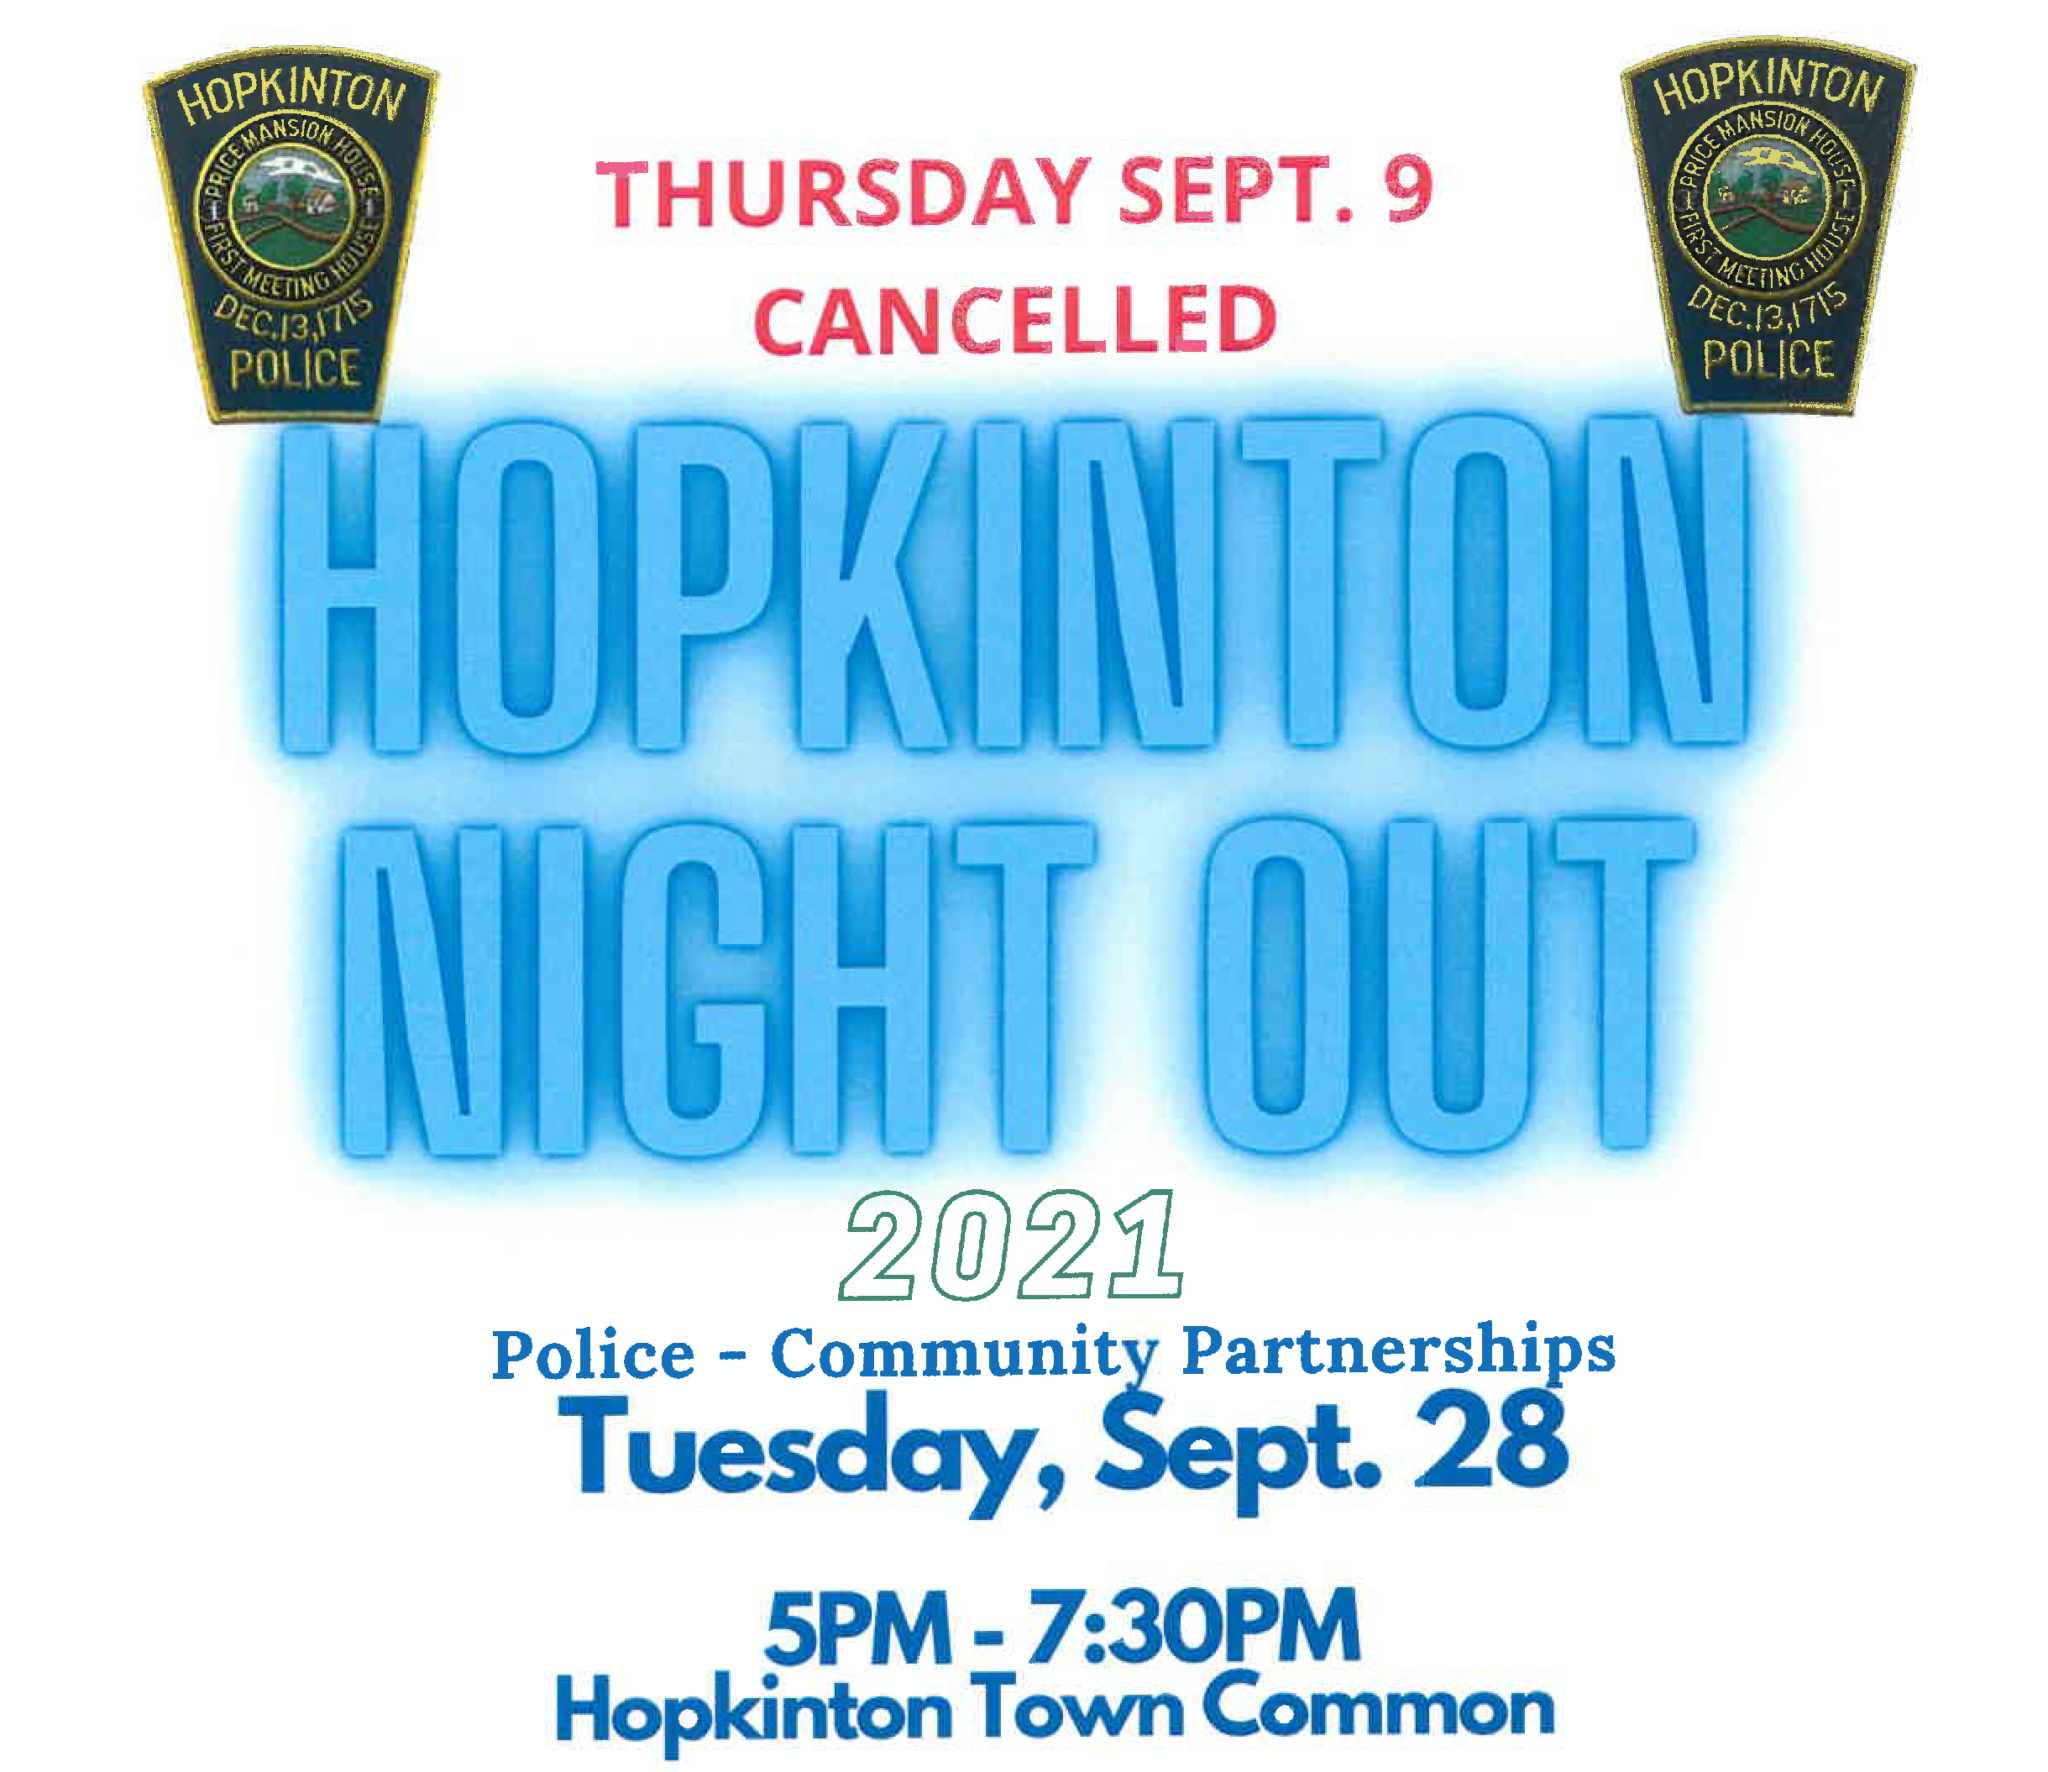 Hopkinton Night Out flyer